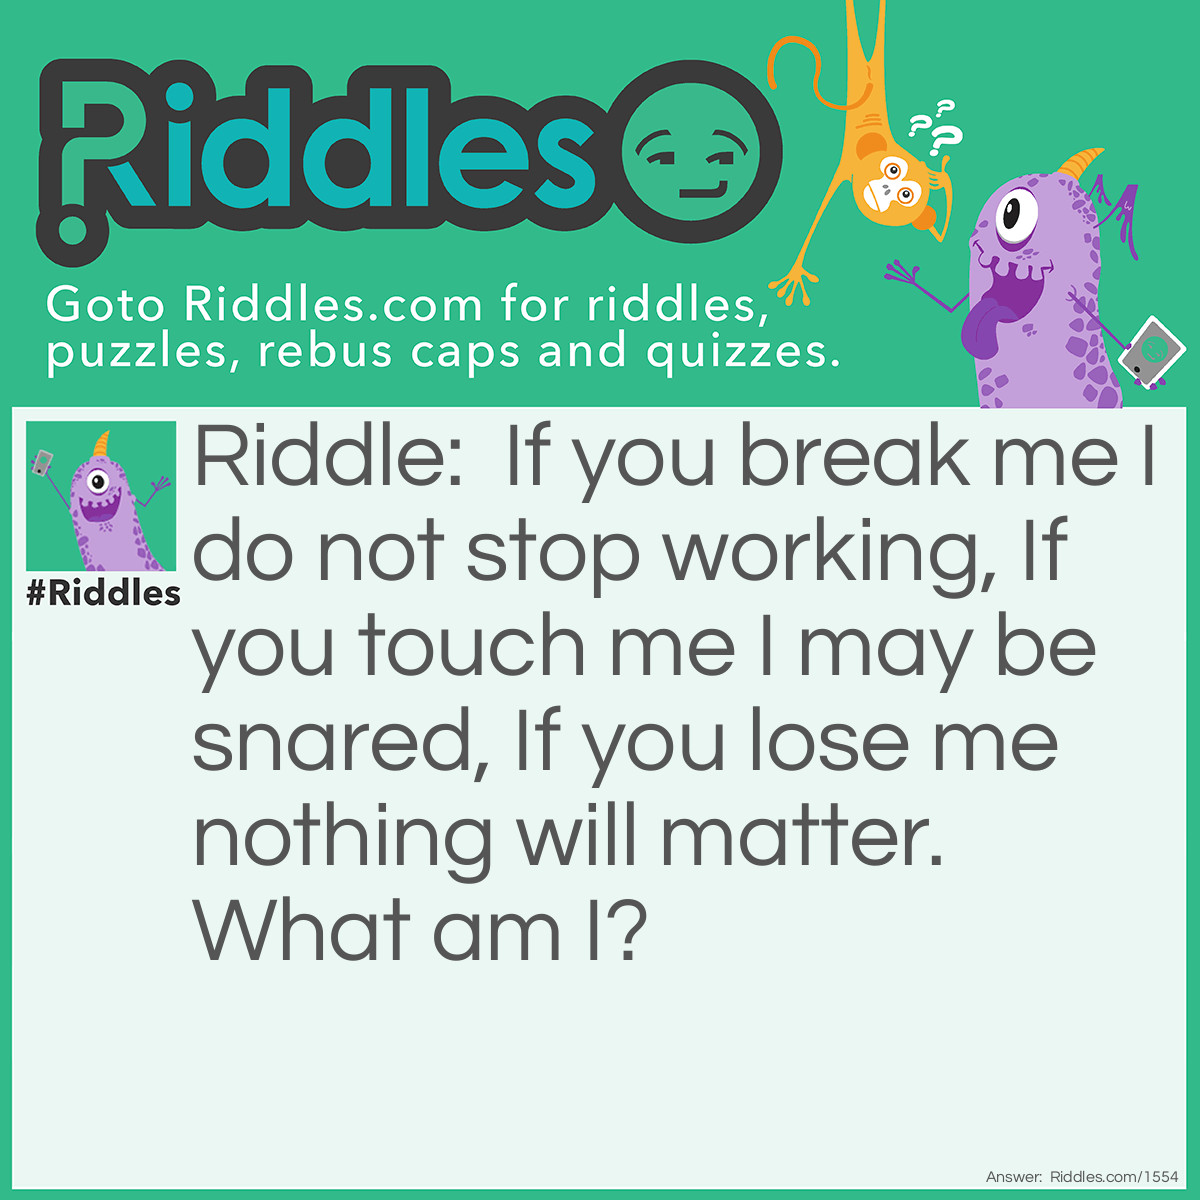 Riddle: If you break me I do not stop working, If you touch me I may be snared, If you lose me nothing will matter. What am I? Answer: Your heart.